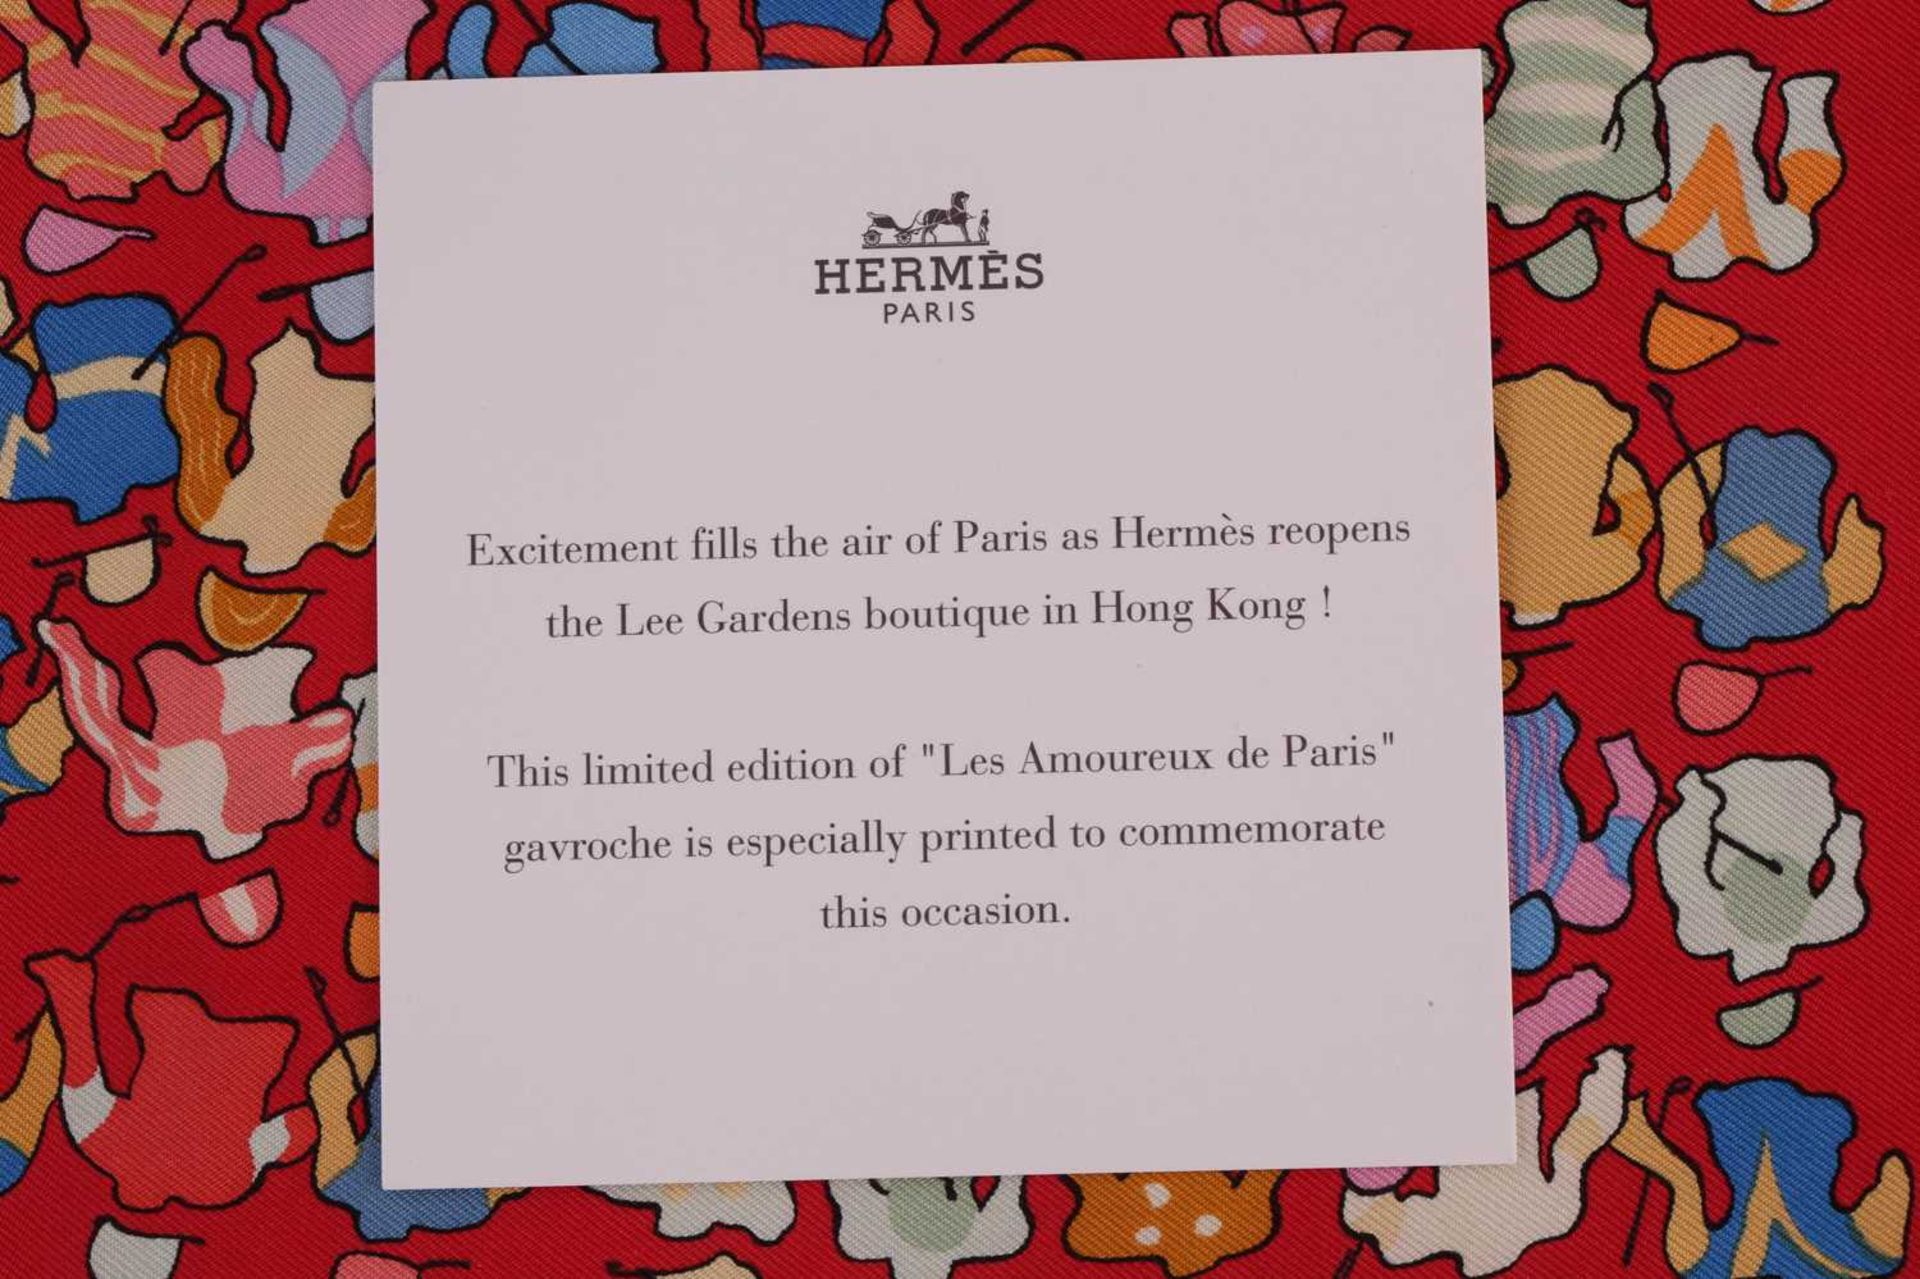 Two Hermes silk scarves; Les Amoreux de Paris limited edition to commemorate Hermes reopening the - Image 11 of 17